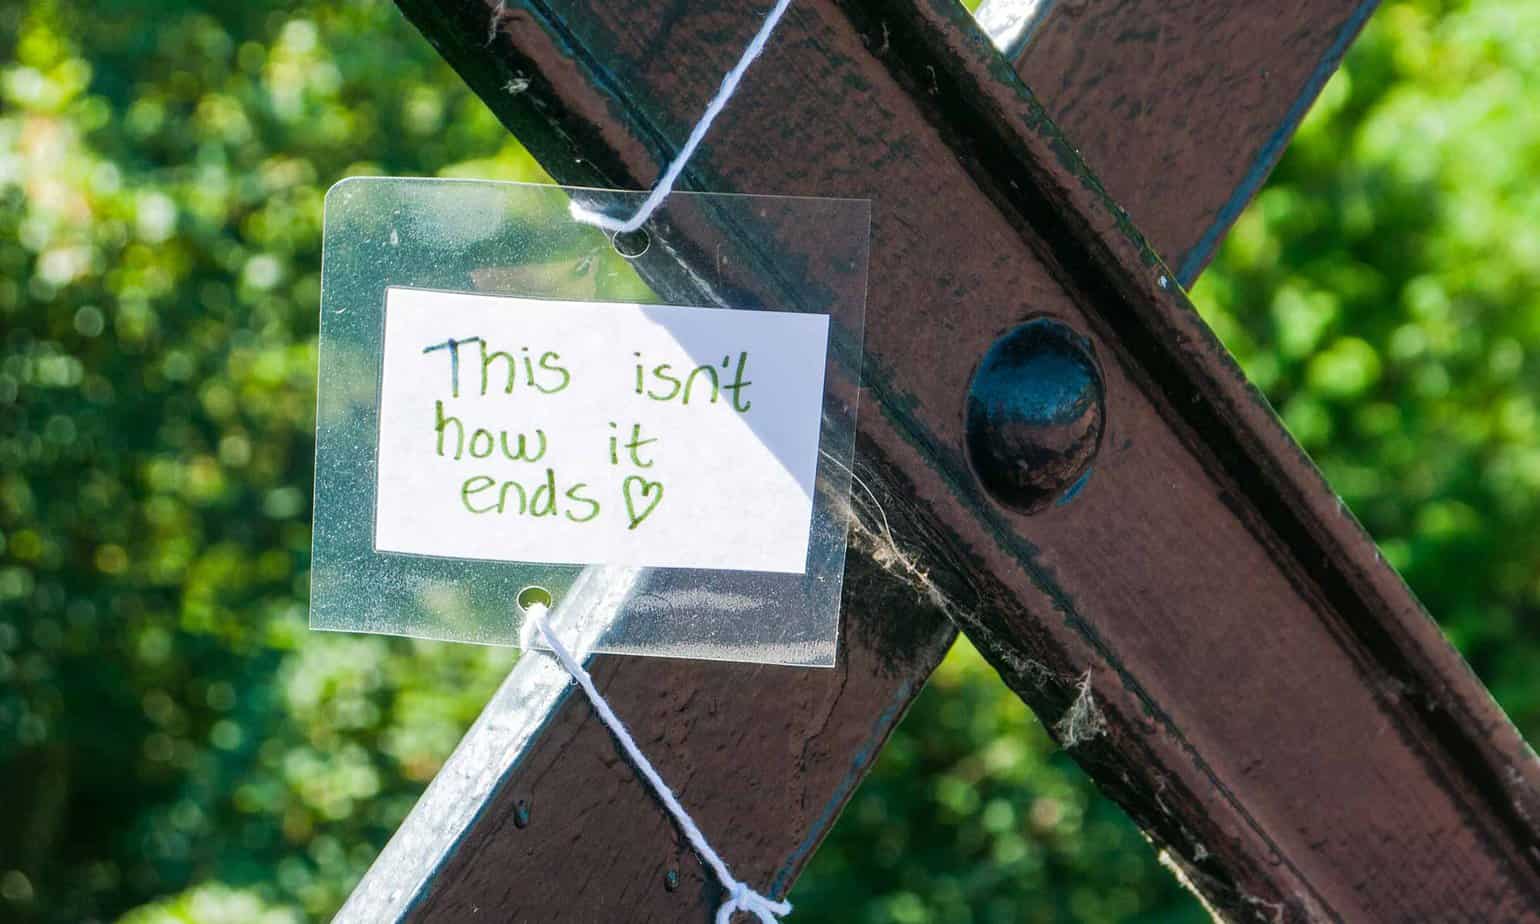 suicide prevention note that says, " This isn't how it ends" hanging on a bridge